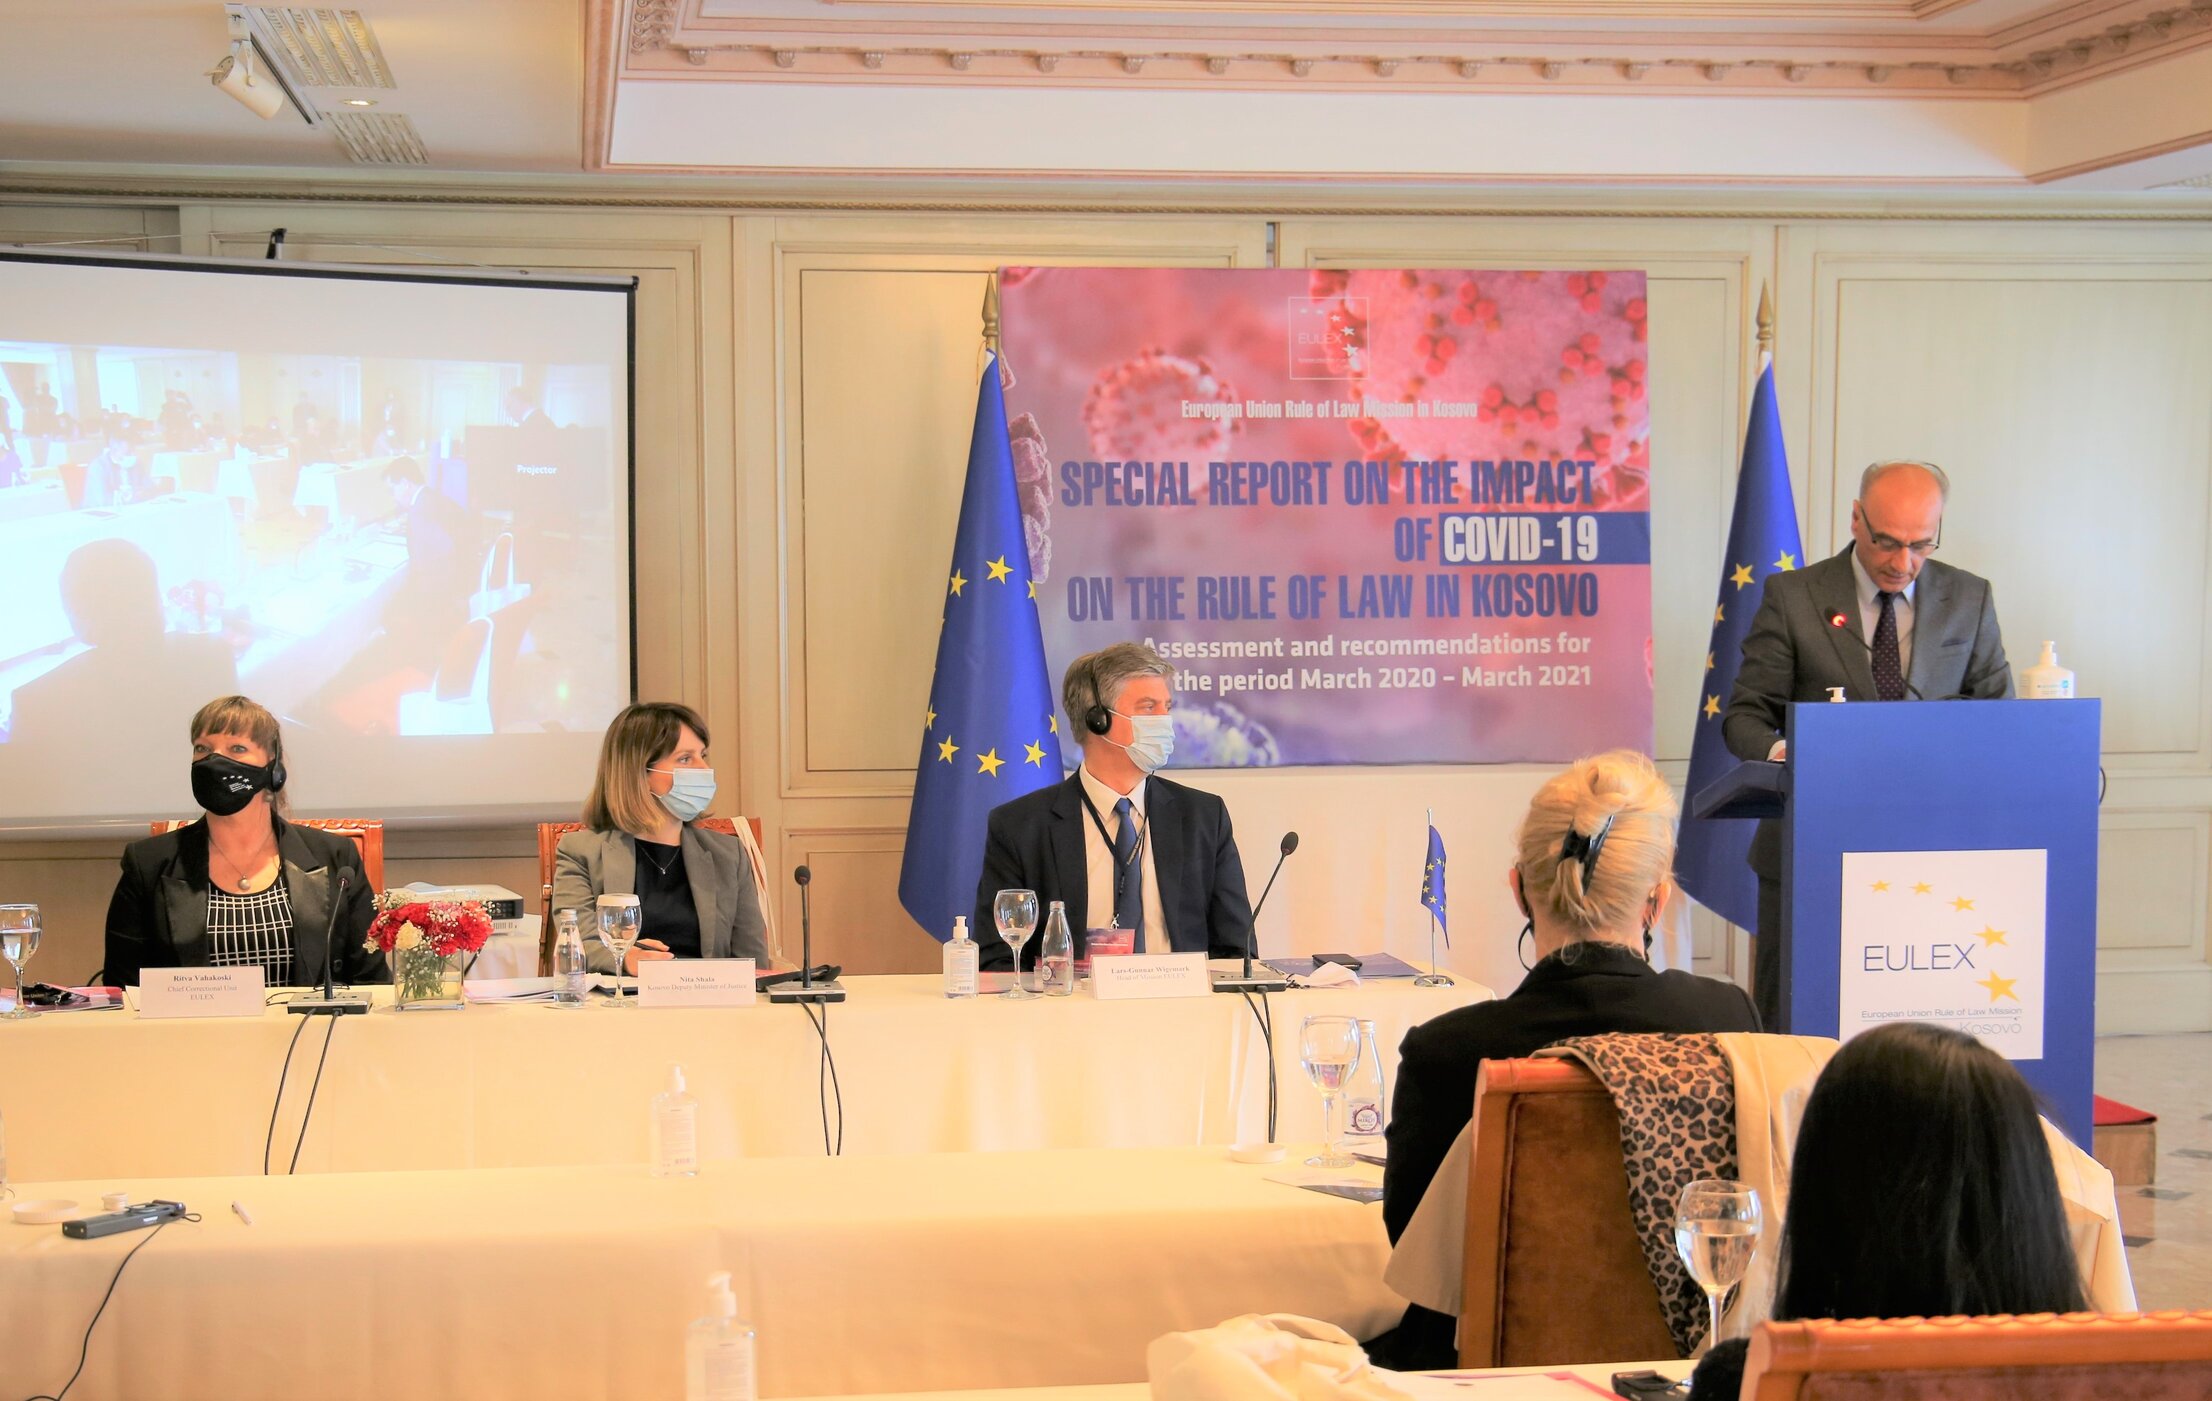 EULEX Special Report on the Impact of Covid-19 on the Rule of Law in Kosovo is presented